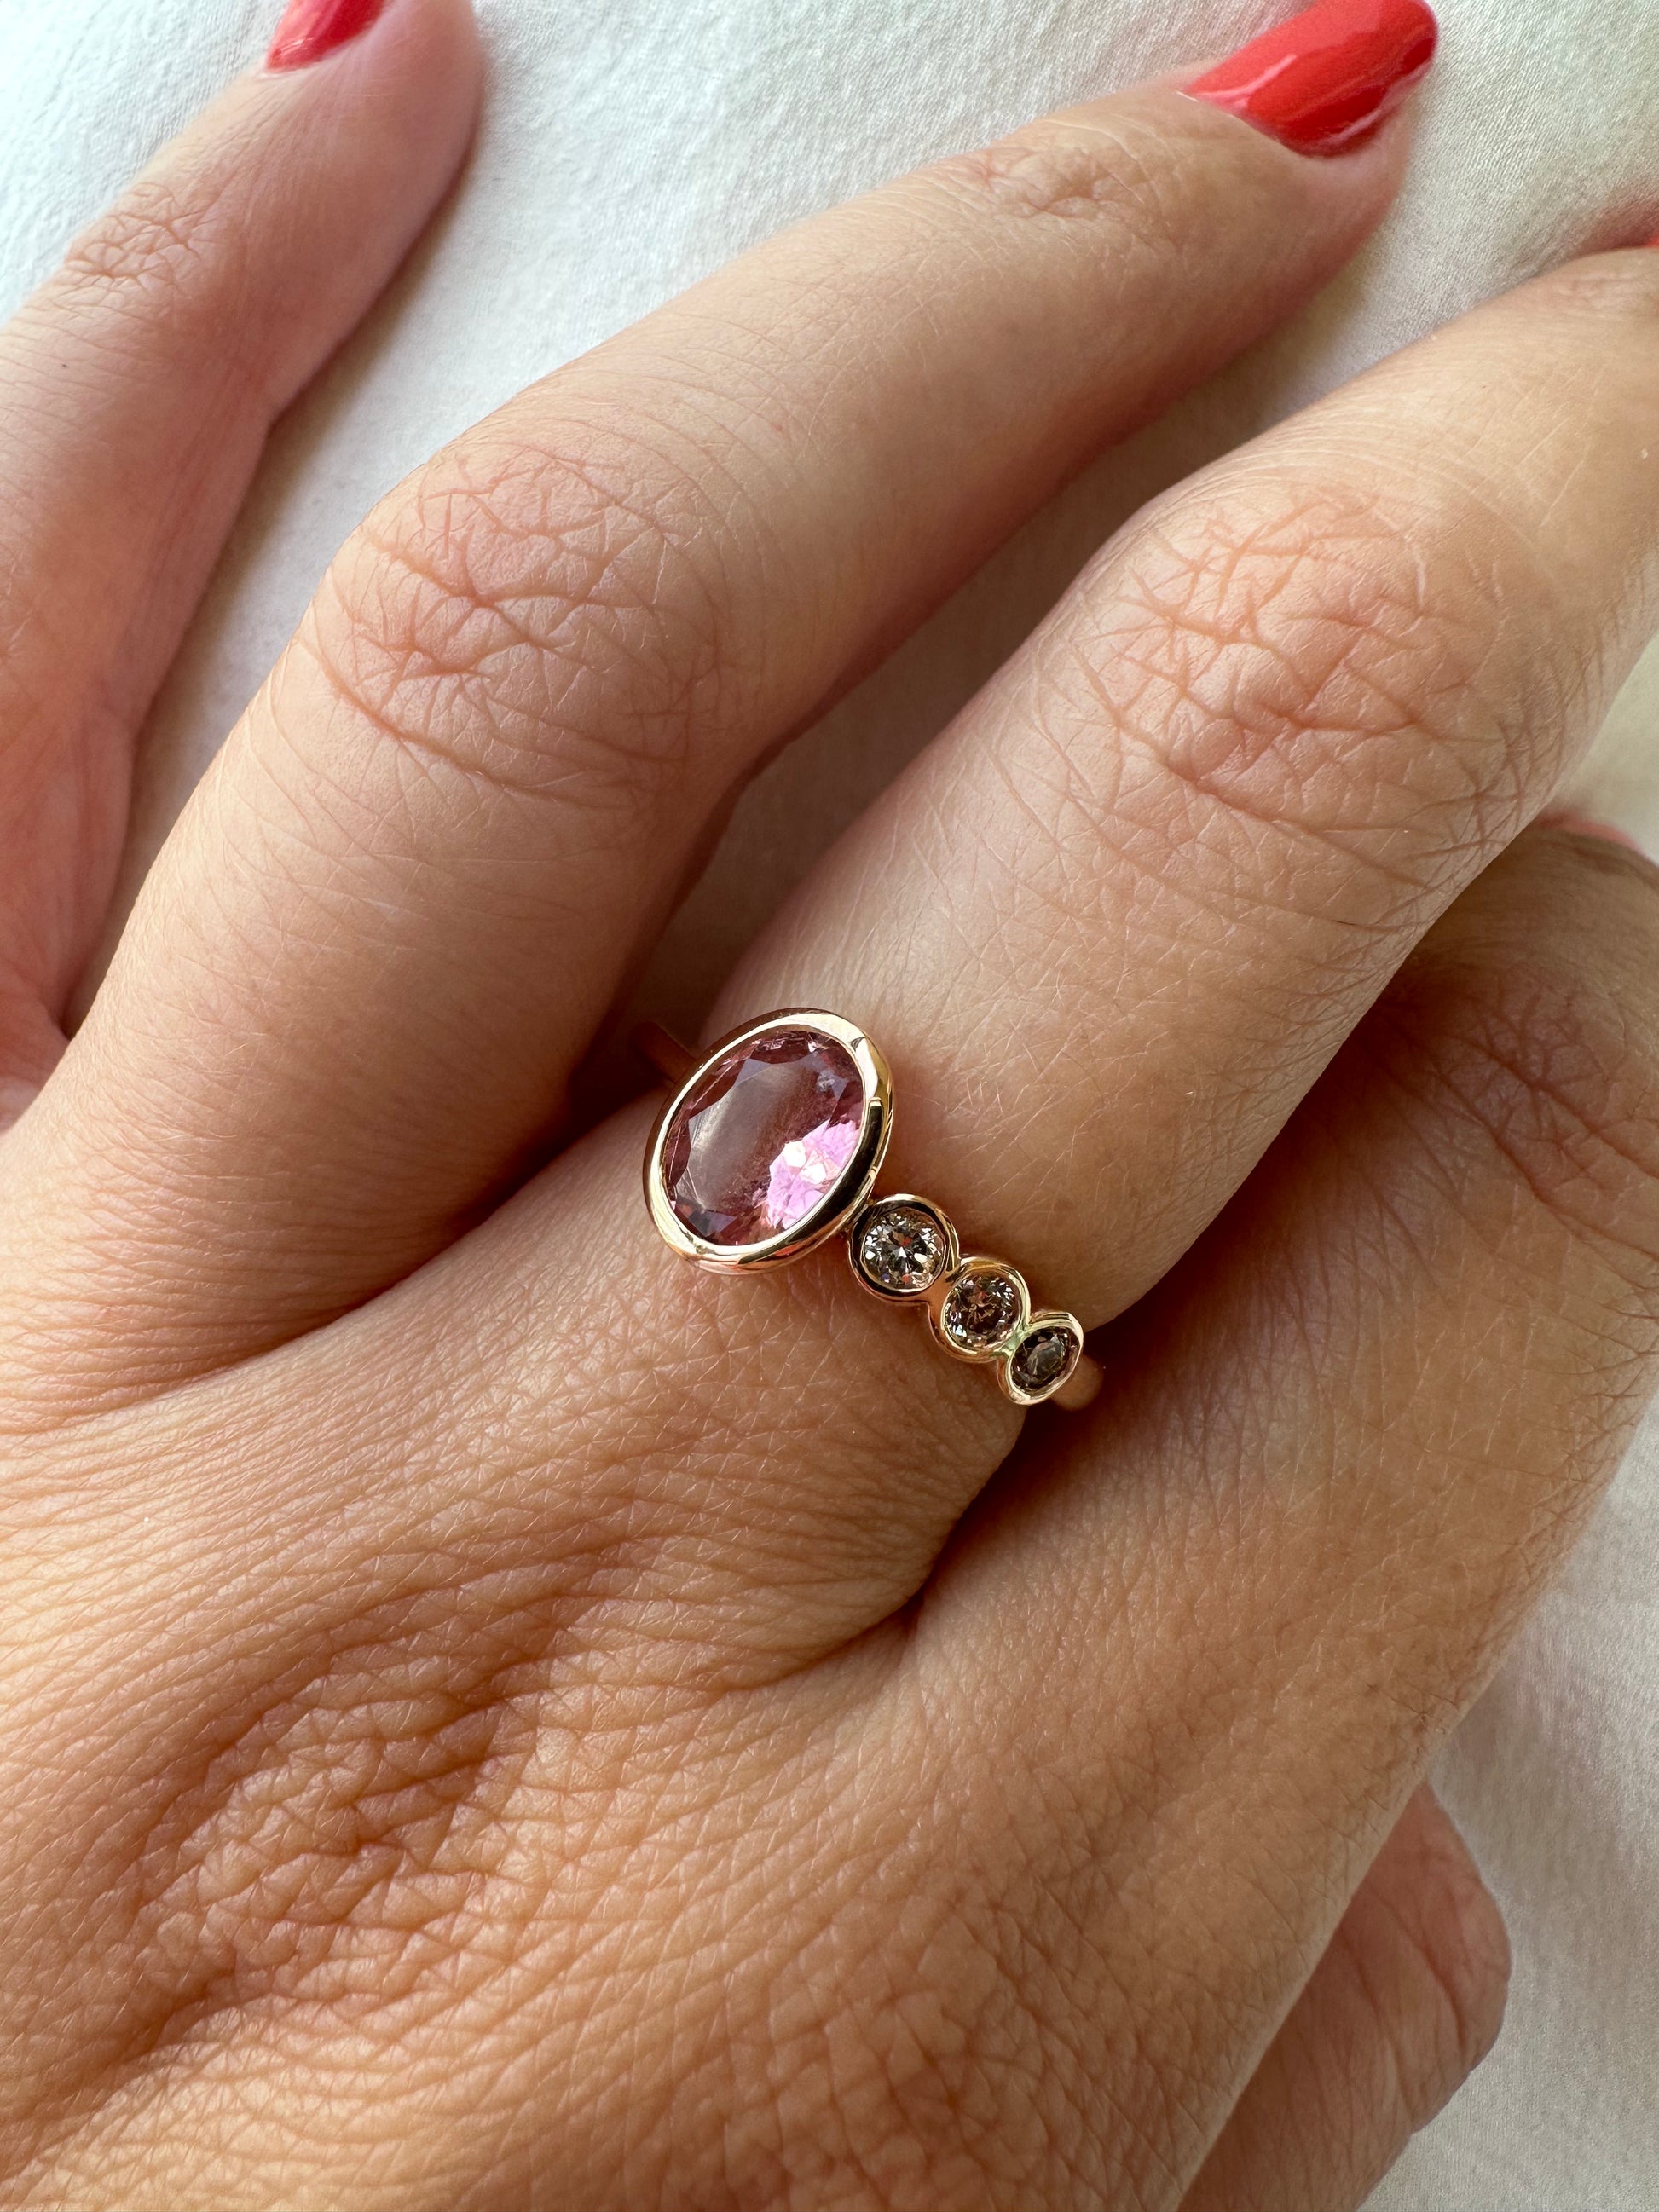 Pink tourmaline ring with diamonds 18kt Rose gold - Ella Creations Jewelry